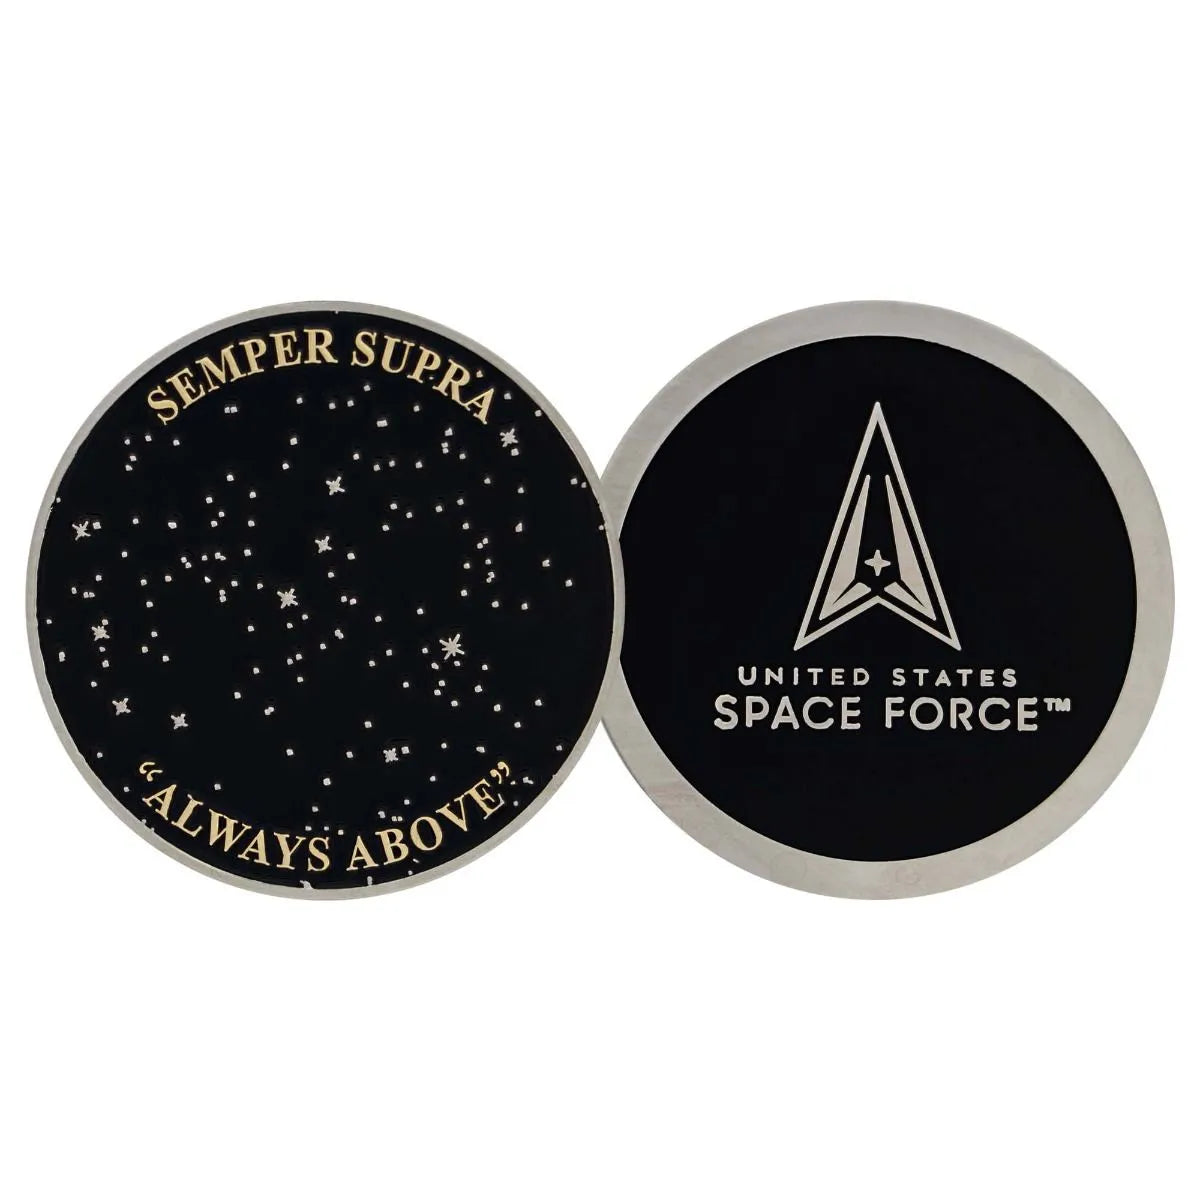 Space Force Coin